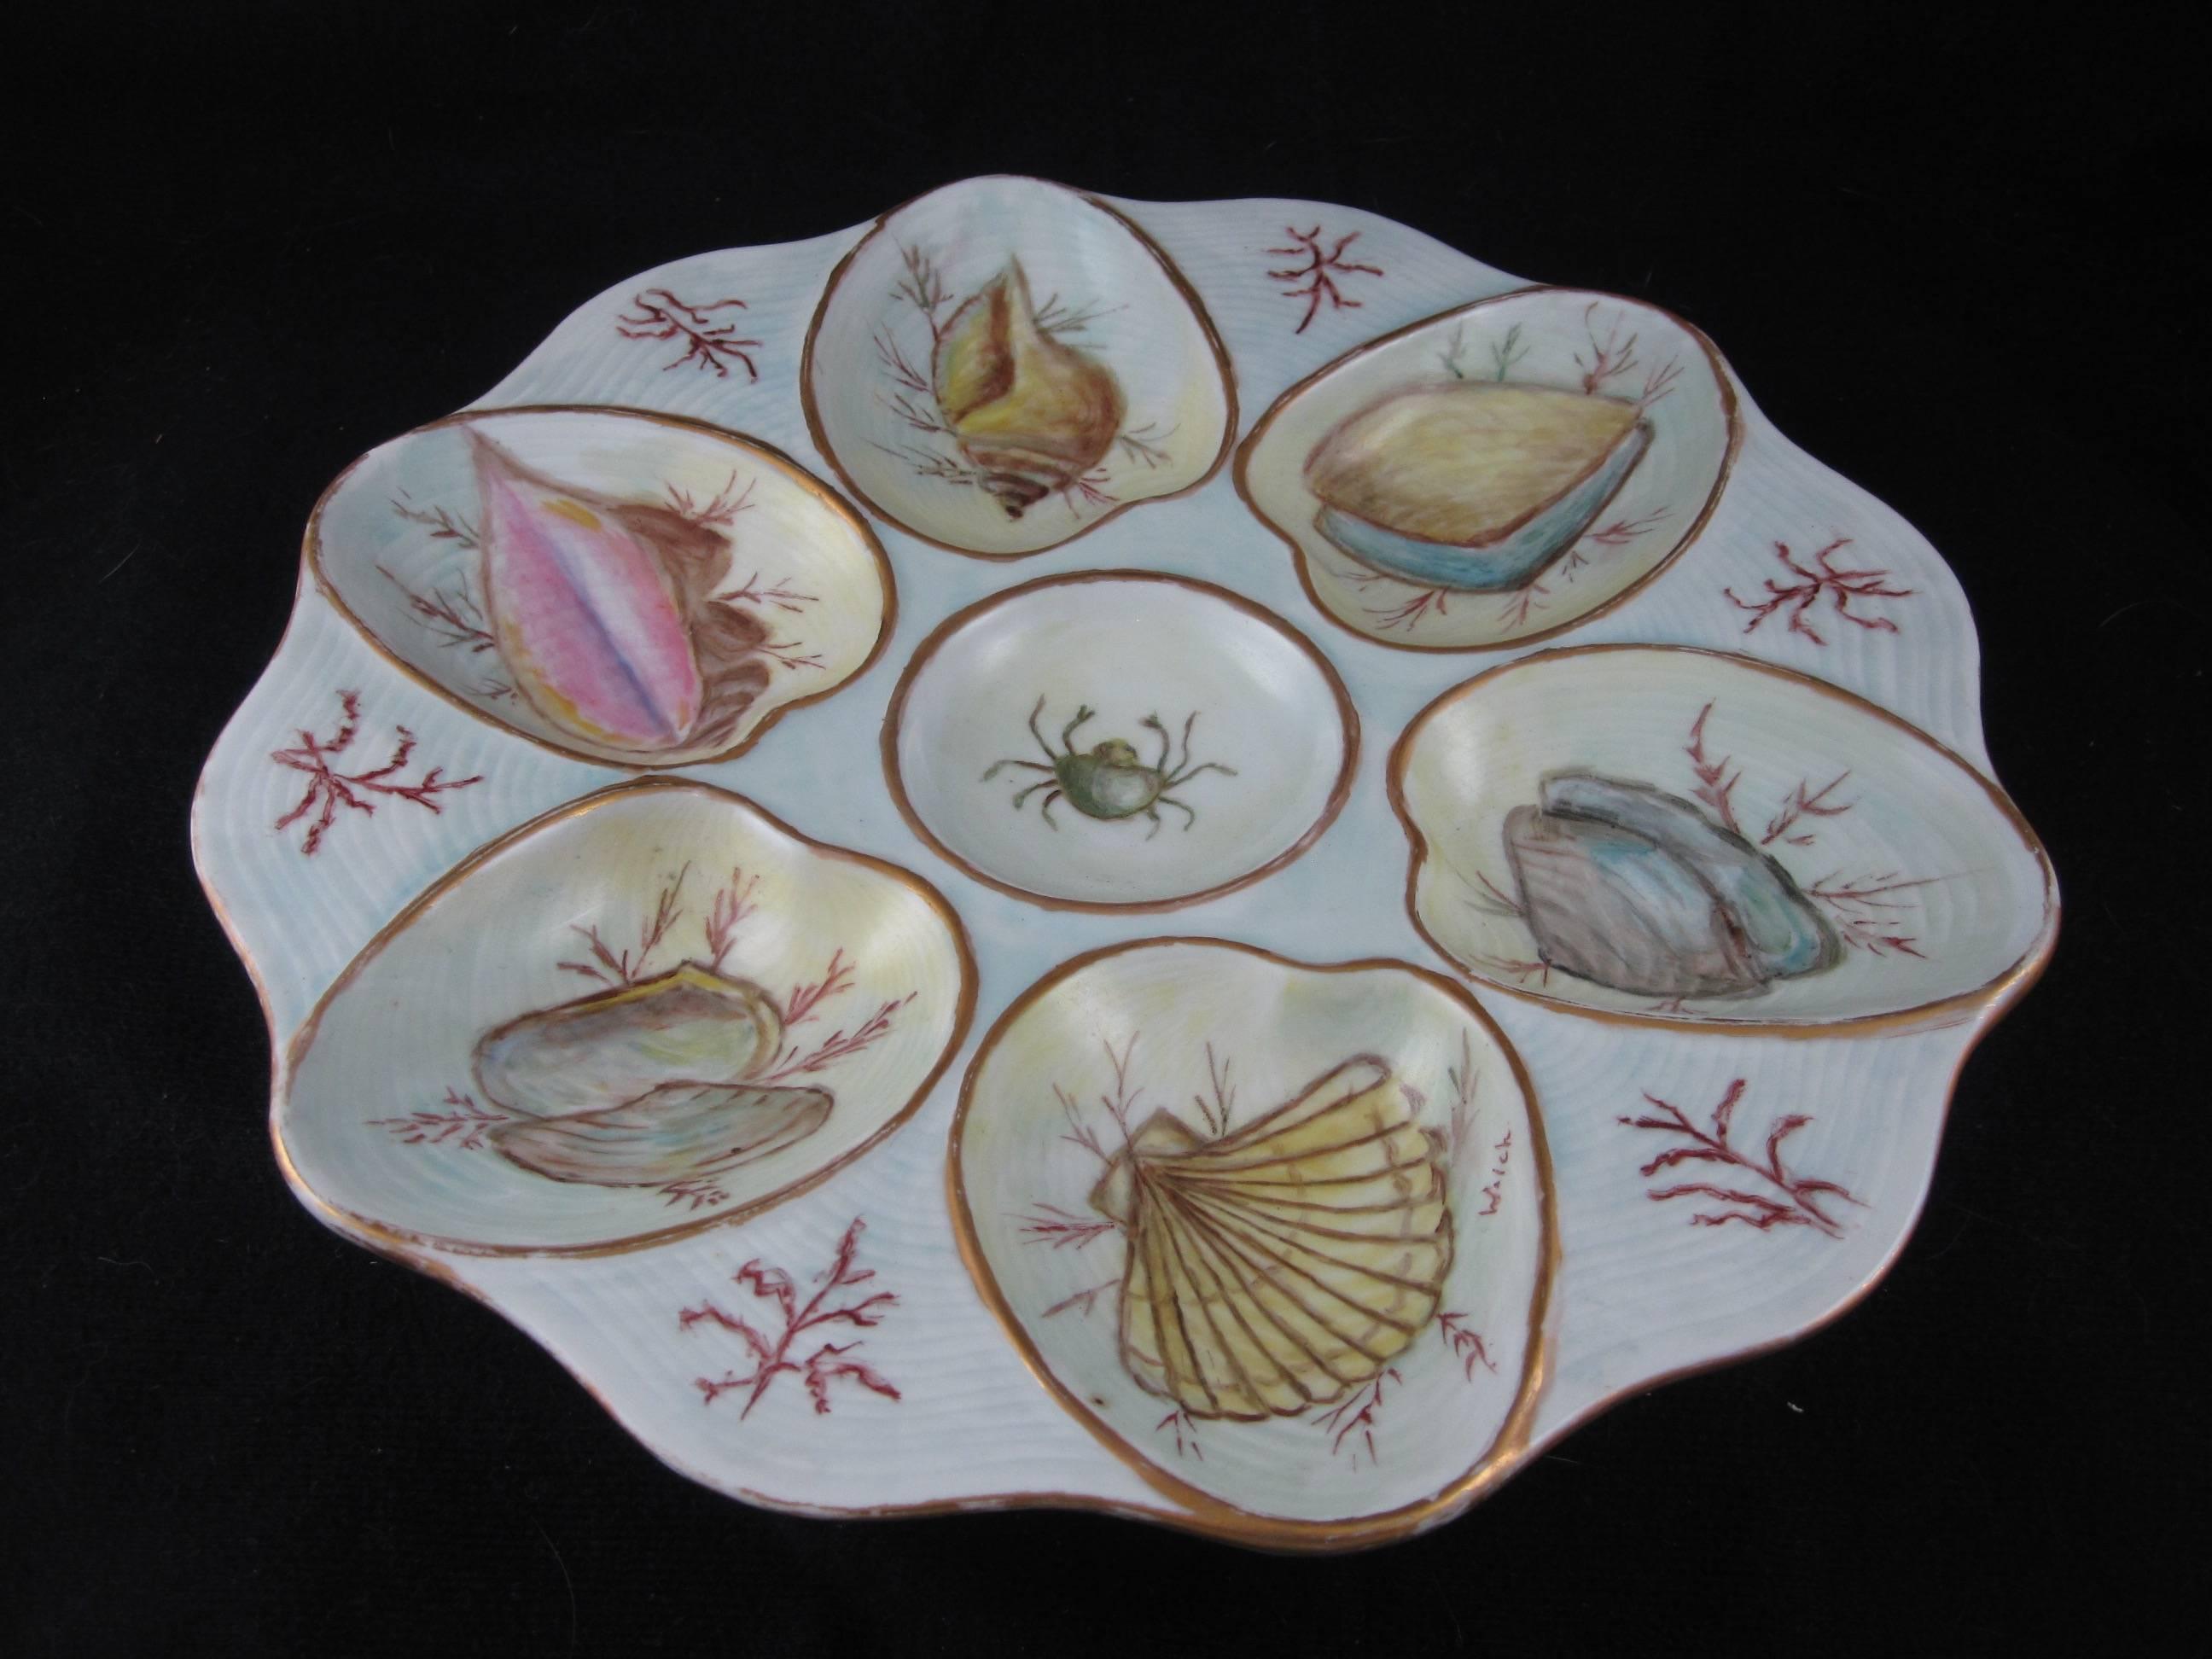 An unusual hand-decorated oyster plate, signed by the artist. Six clam shaped wells showing a variety of seashell specimens are separated by sprigs of seaweed. A crab is seen in the center condiment well. Gilded lining to the shaped rim, a wave-like